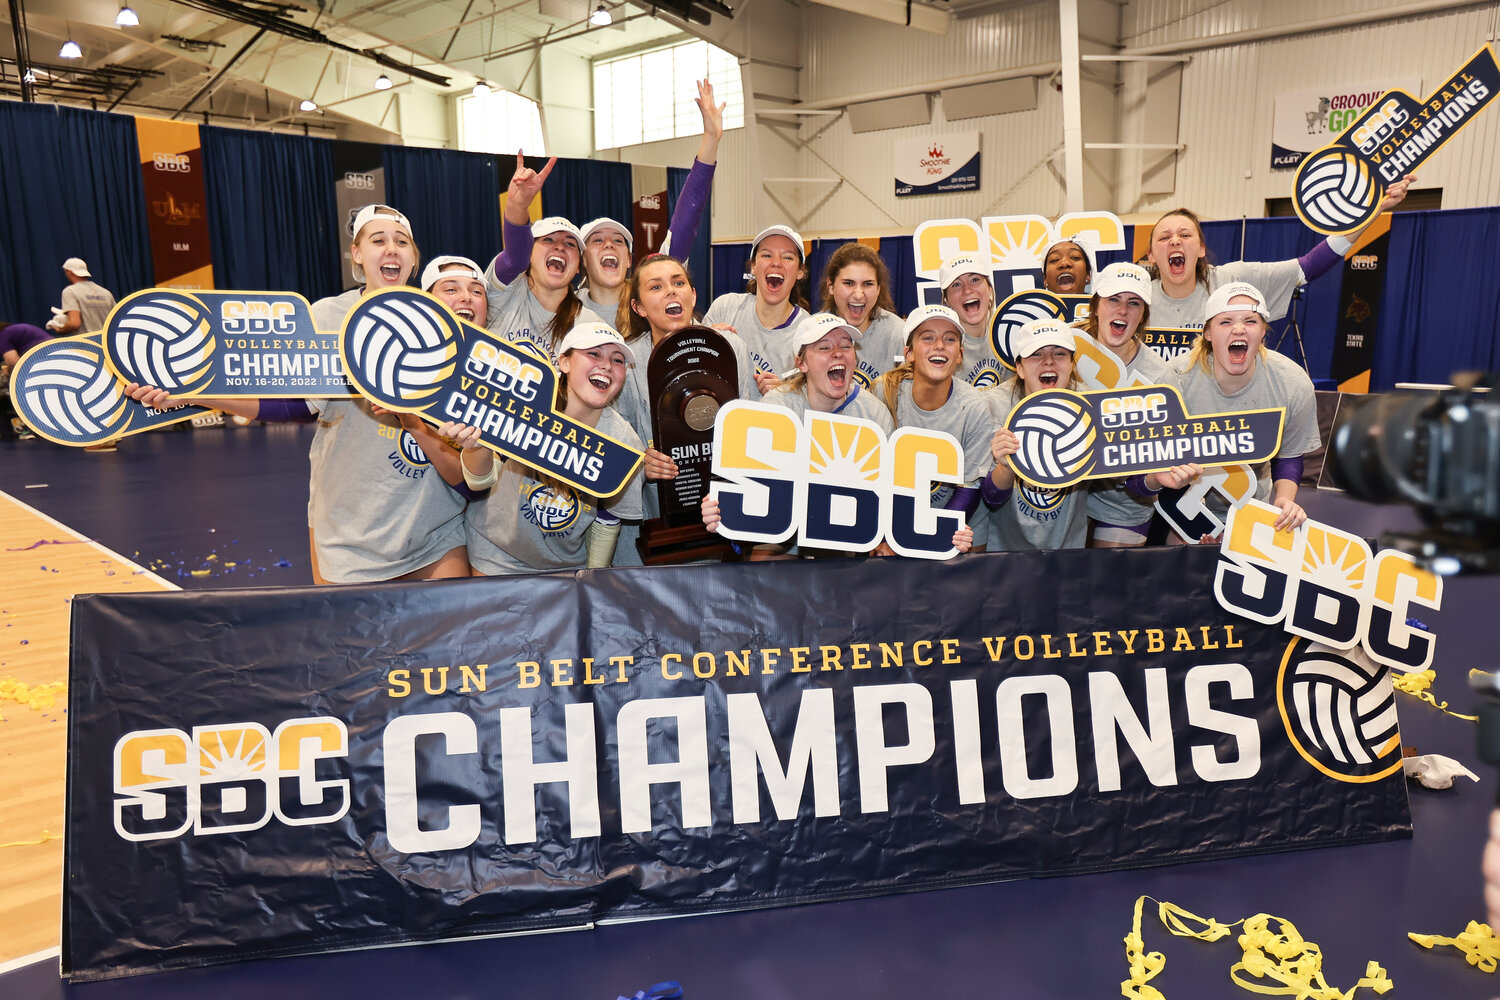 The James Madison Dukes were crowned volleyball queens of the Sun Belt Conference at the Foley Sports Tourism Complex on Nov. 20, 2022. It marked the school’s first conference championship on the volleyball court and the Dukes will have a chance to defend their title on the same court this fall starting on Nov. 15.